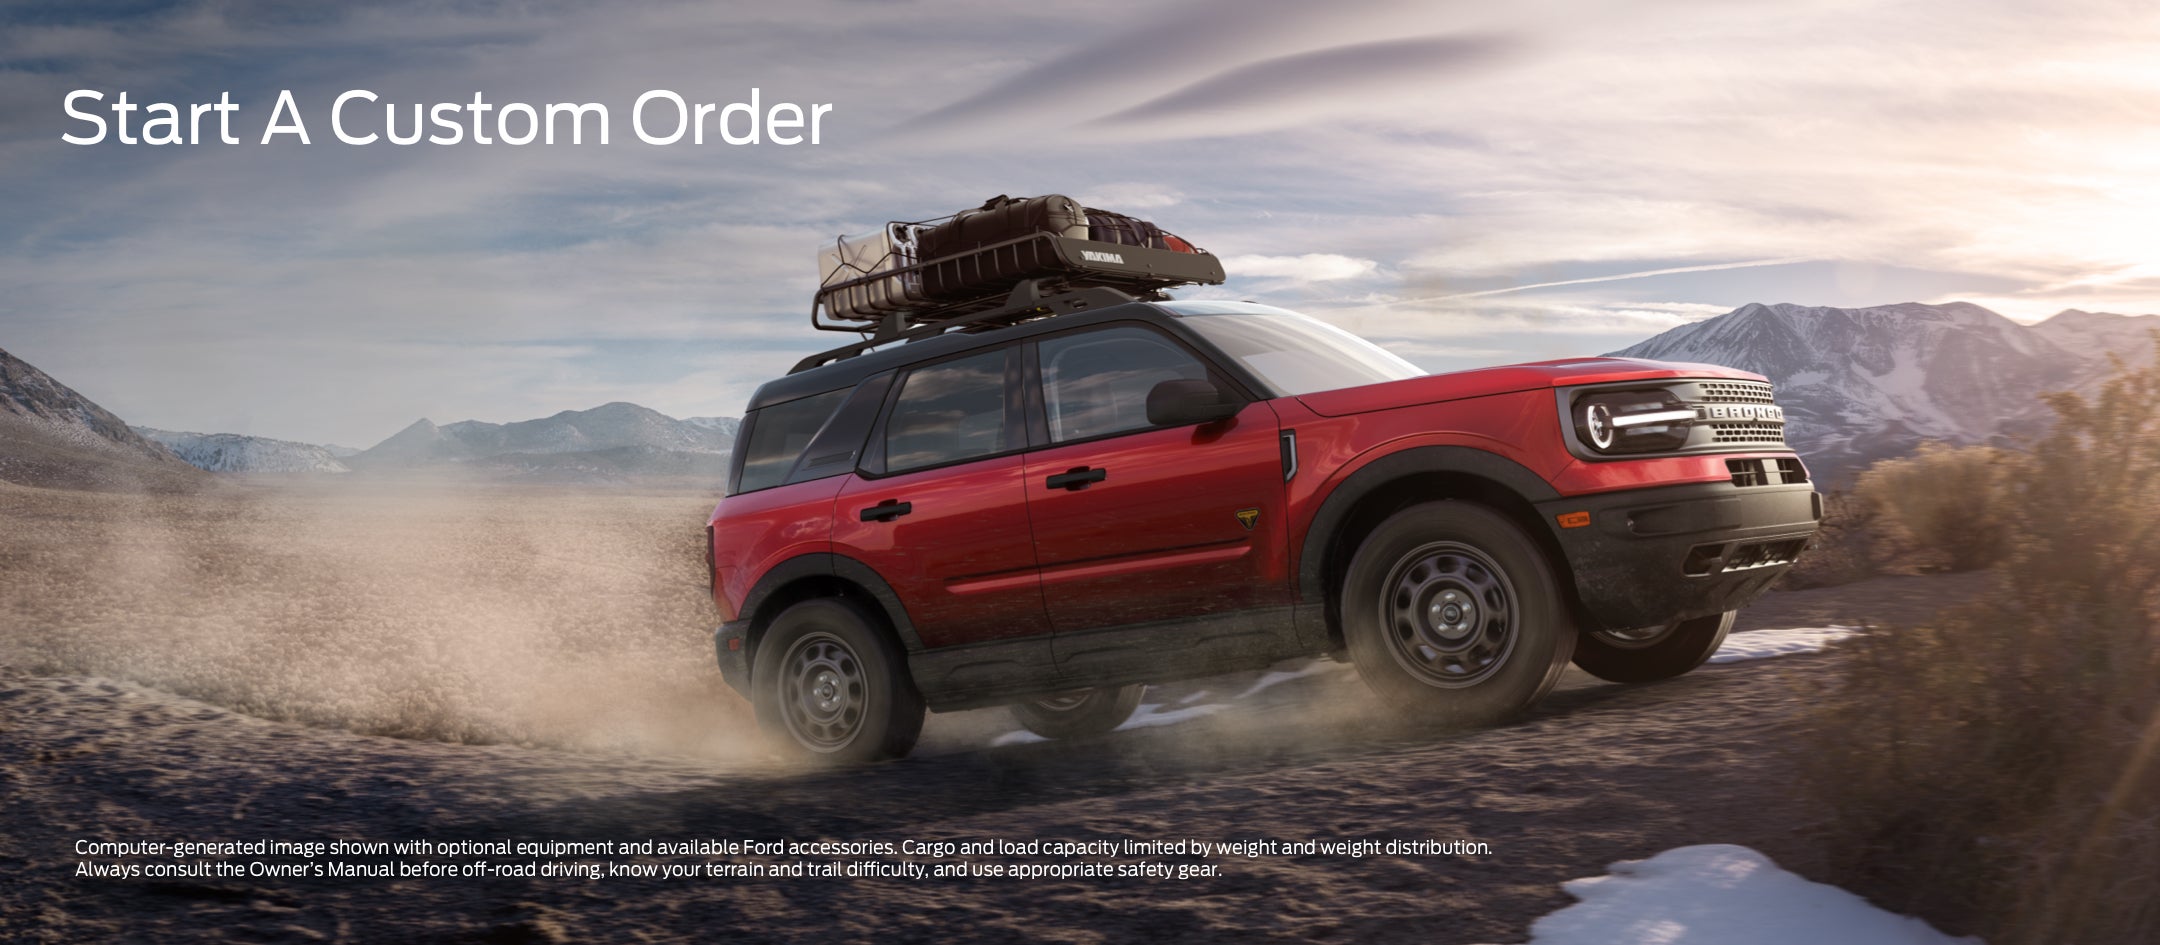 Start a custom order | Swant Graber Ford in Barron WI